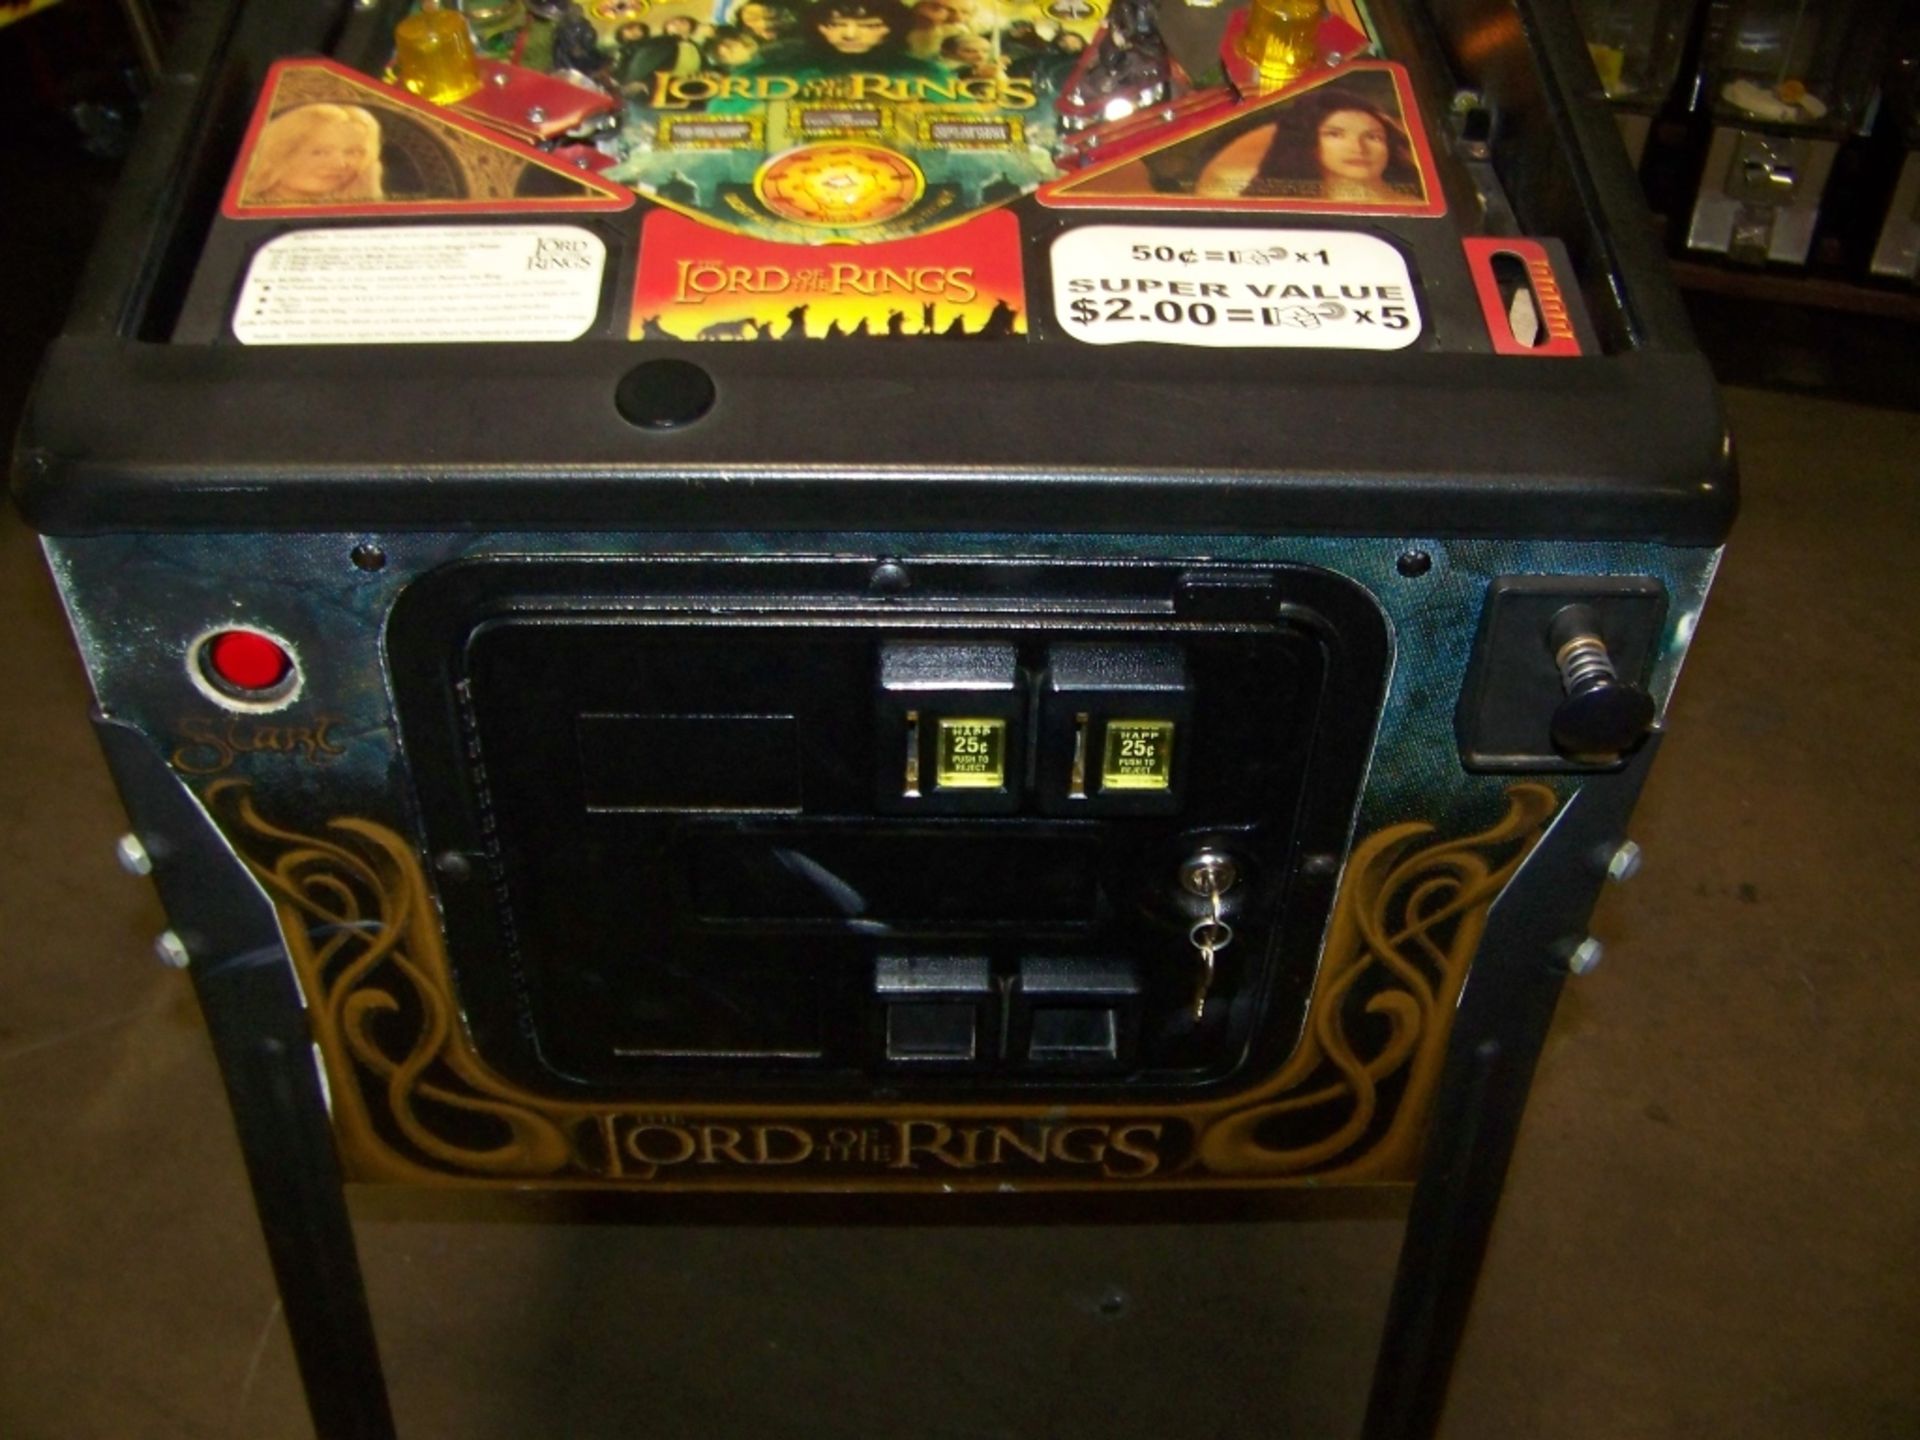 LORD OF THE RINGS PINBALL MACHINE STERN Item is in used condition. Evidence of wear and commercial - Image 8 of 10